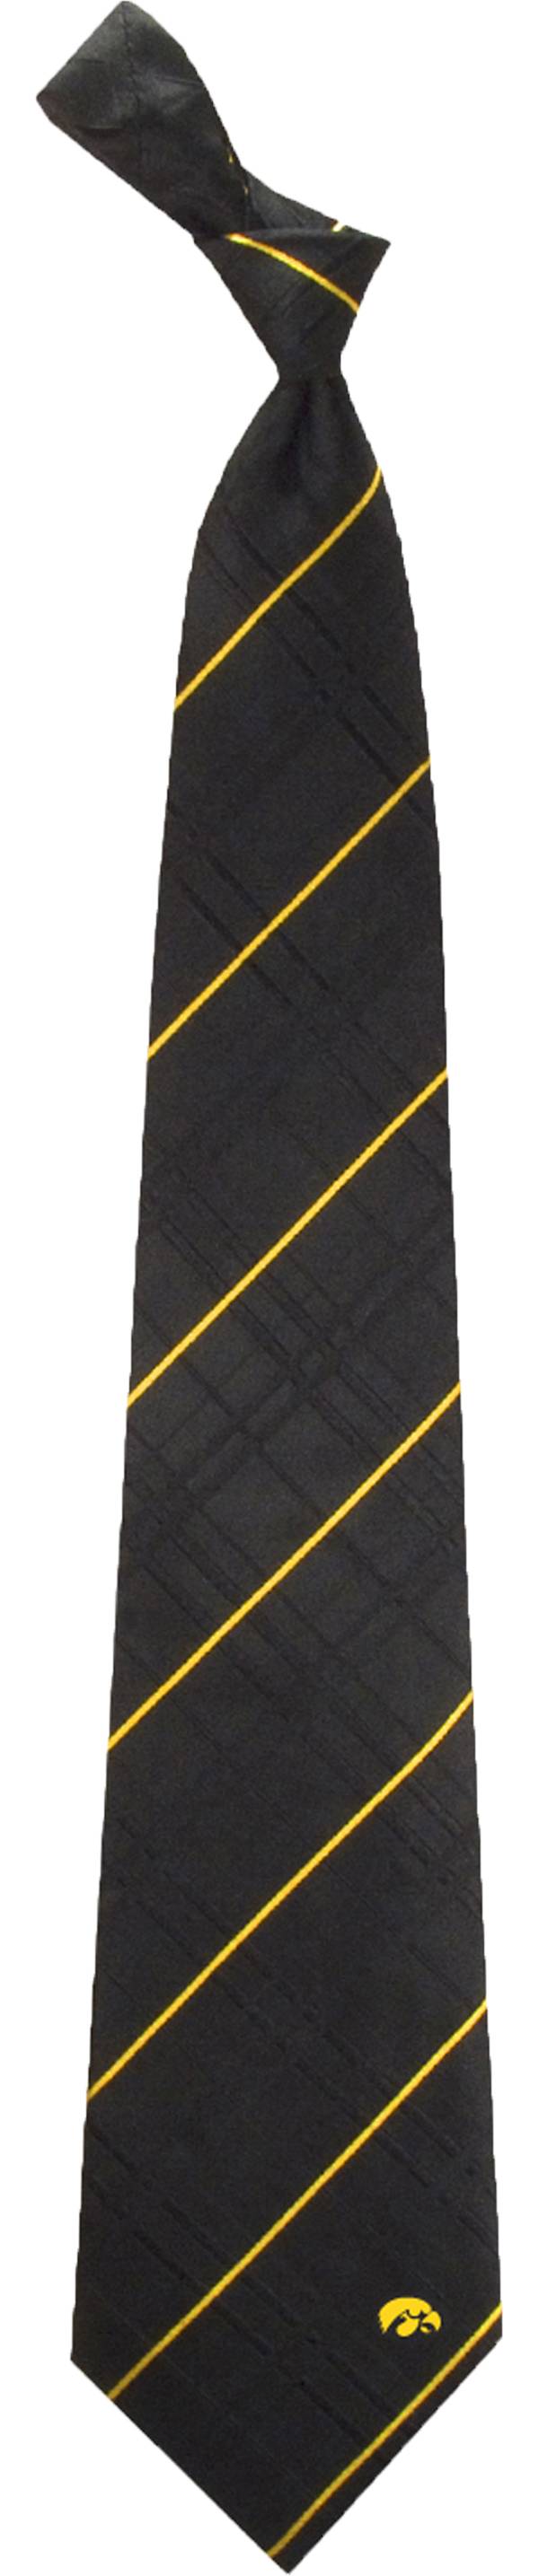 Eagles Wings Iowa Hawkeyes Woven Oxford Necktie product image